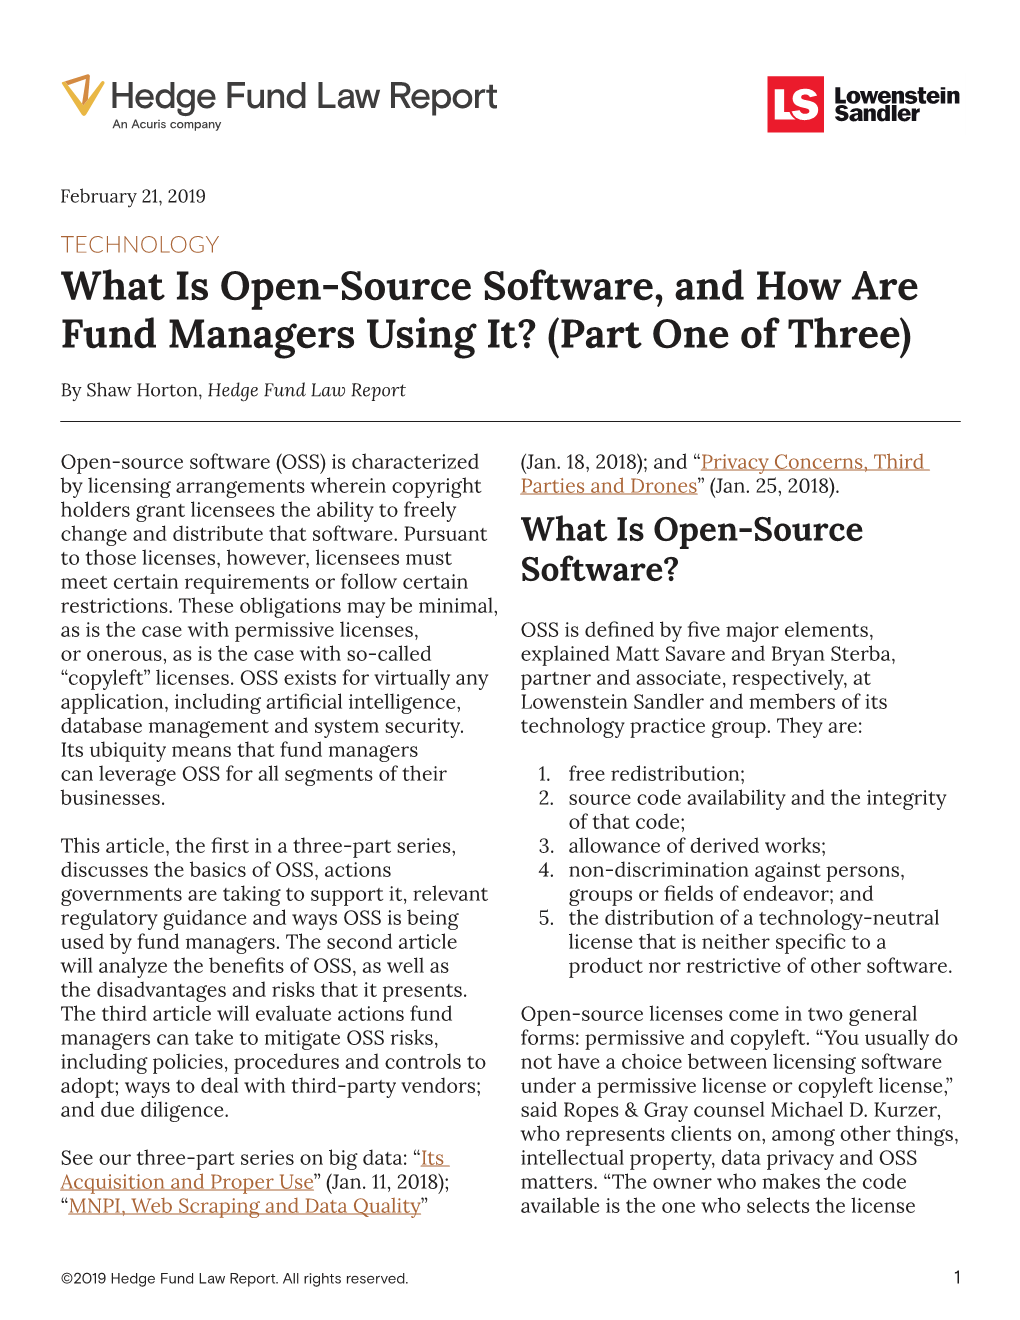 What Is Open-Source Software, and How Are Fund Managers Using It? (Part One of Three)